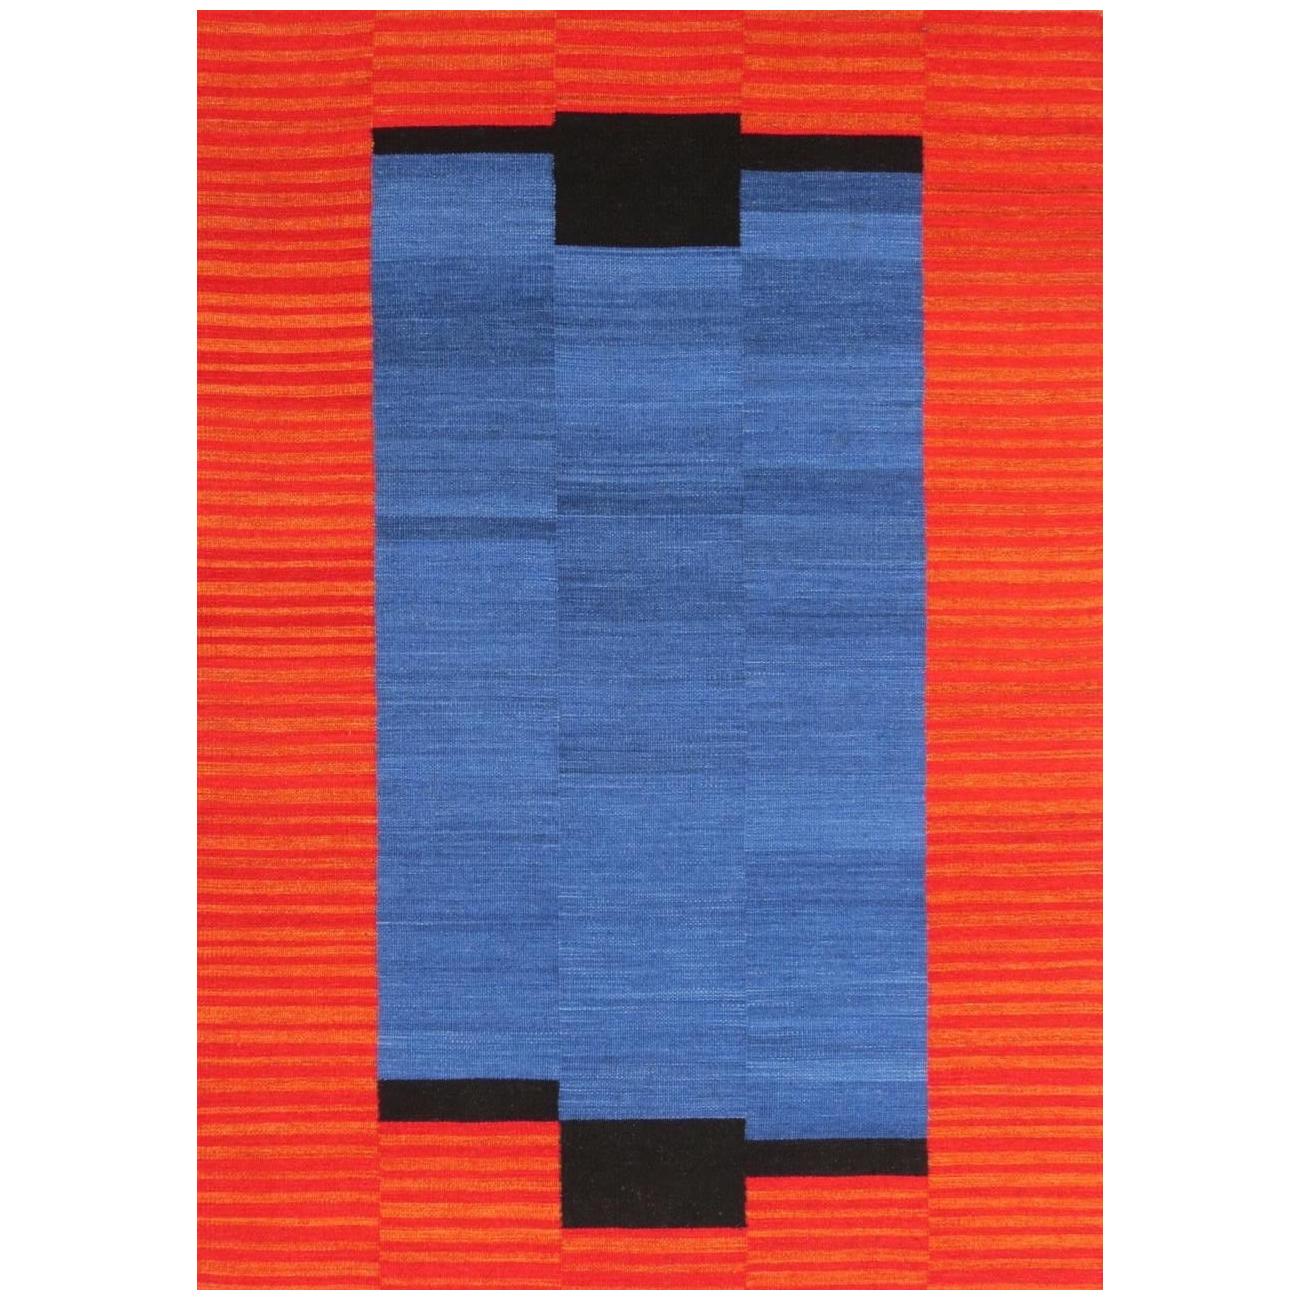 New Modern Design Handwoven Flat Rug Kilim size 6ft 6in x 9ft 10in For Sale